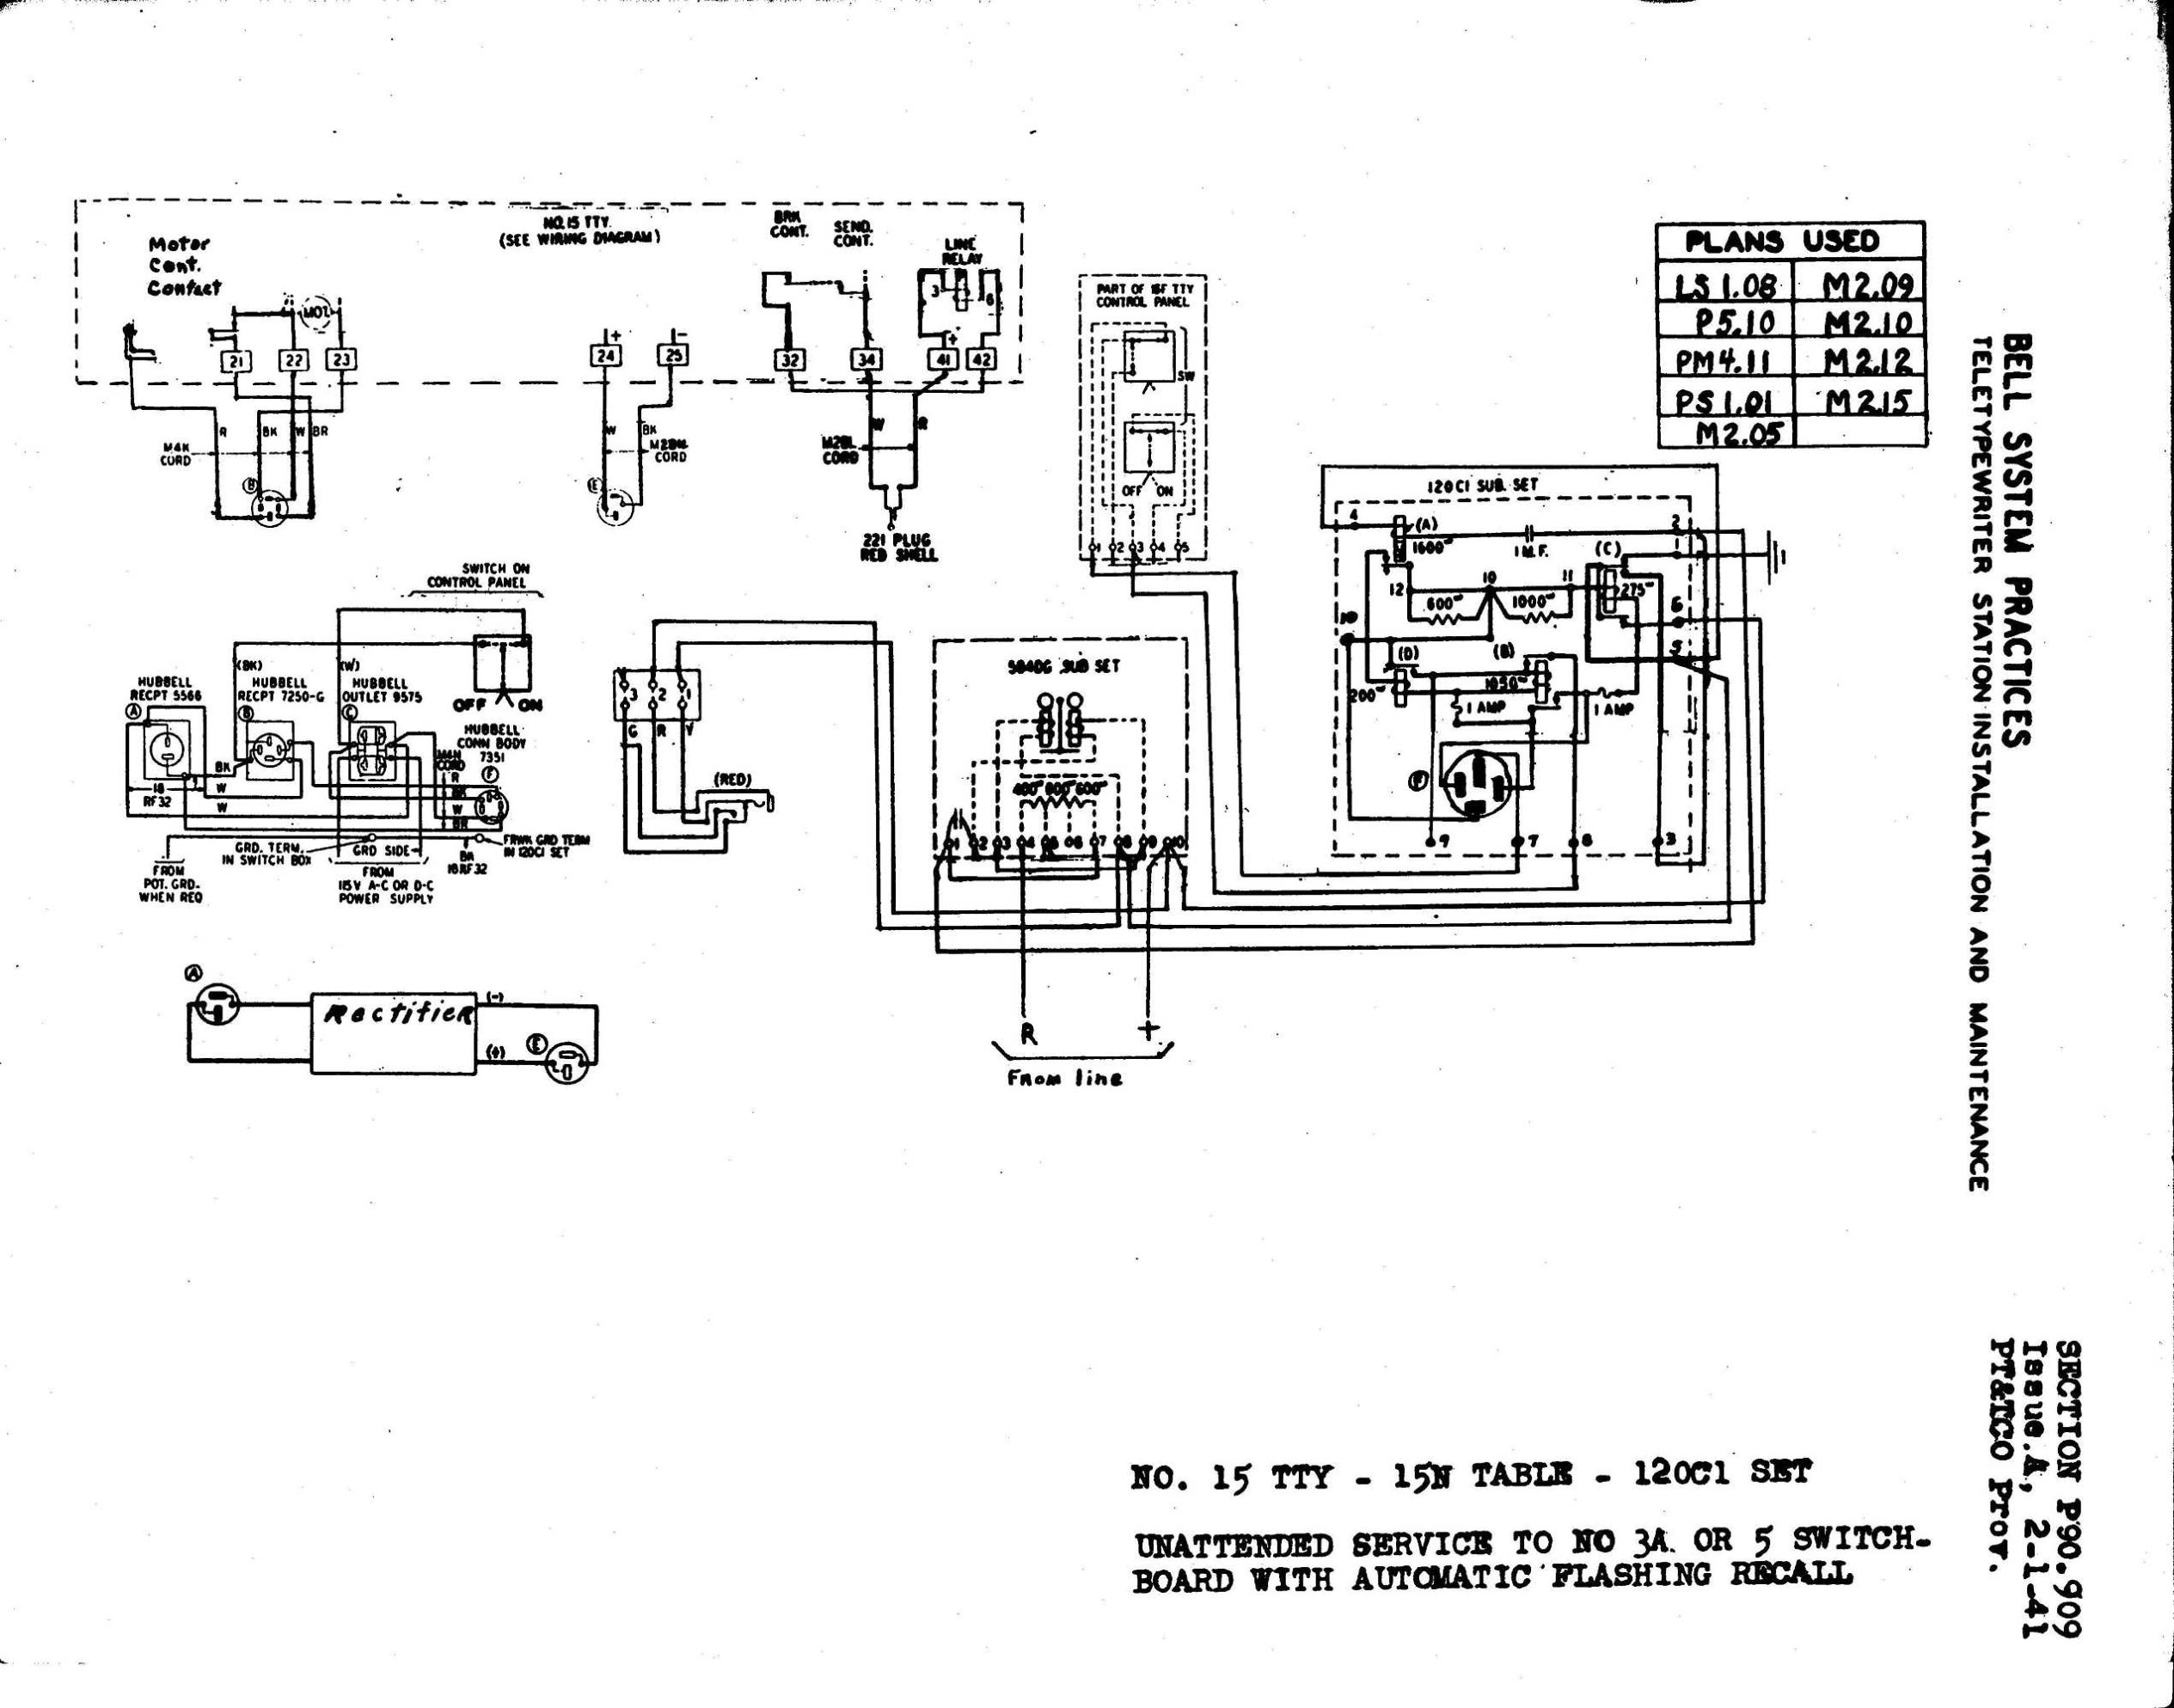 Bell Systems 901 Wiring Diagram - Wiring Diagram